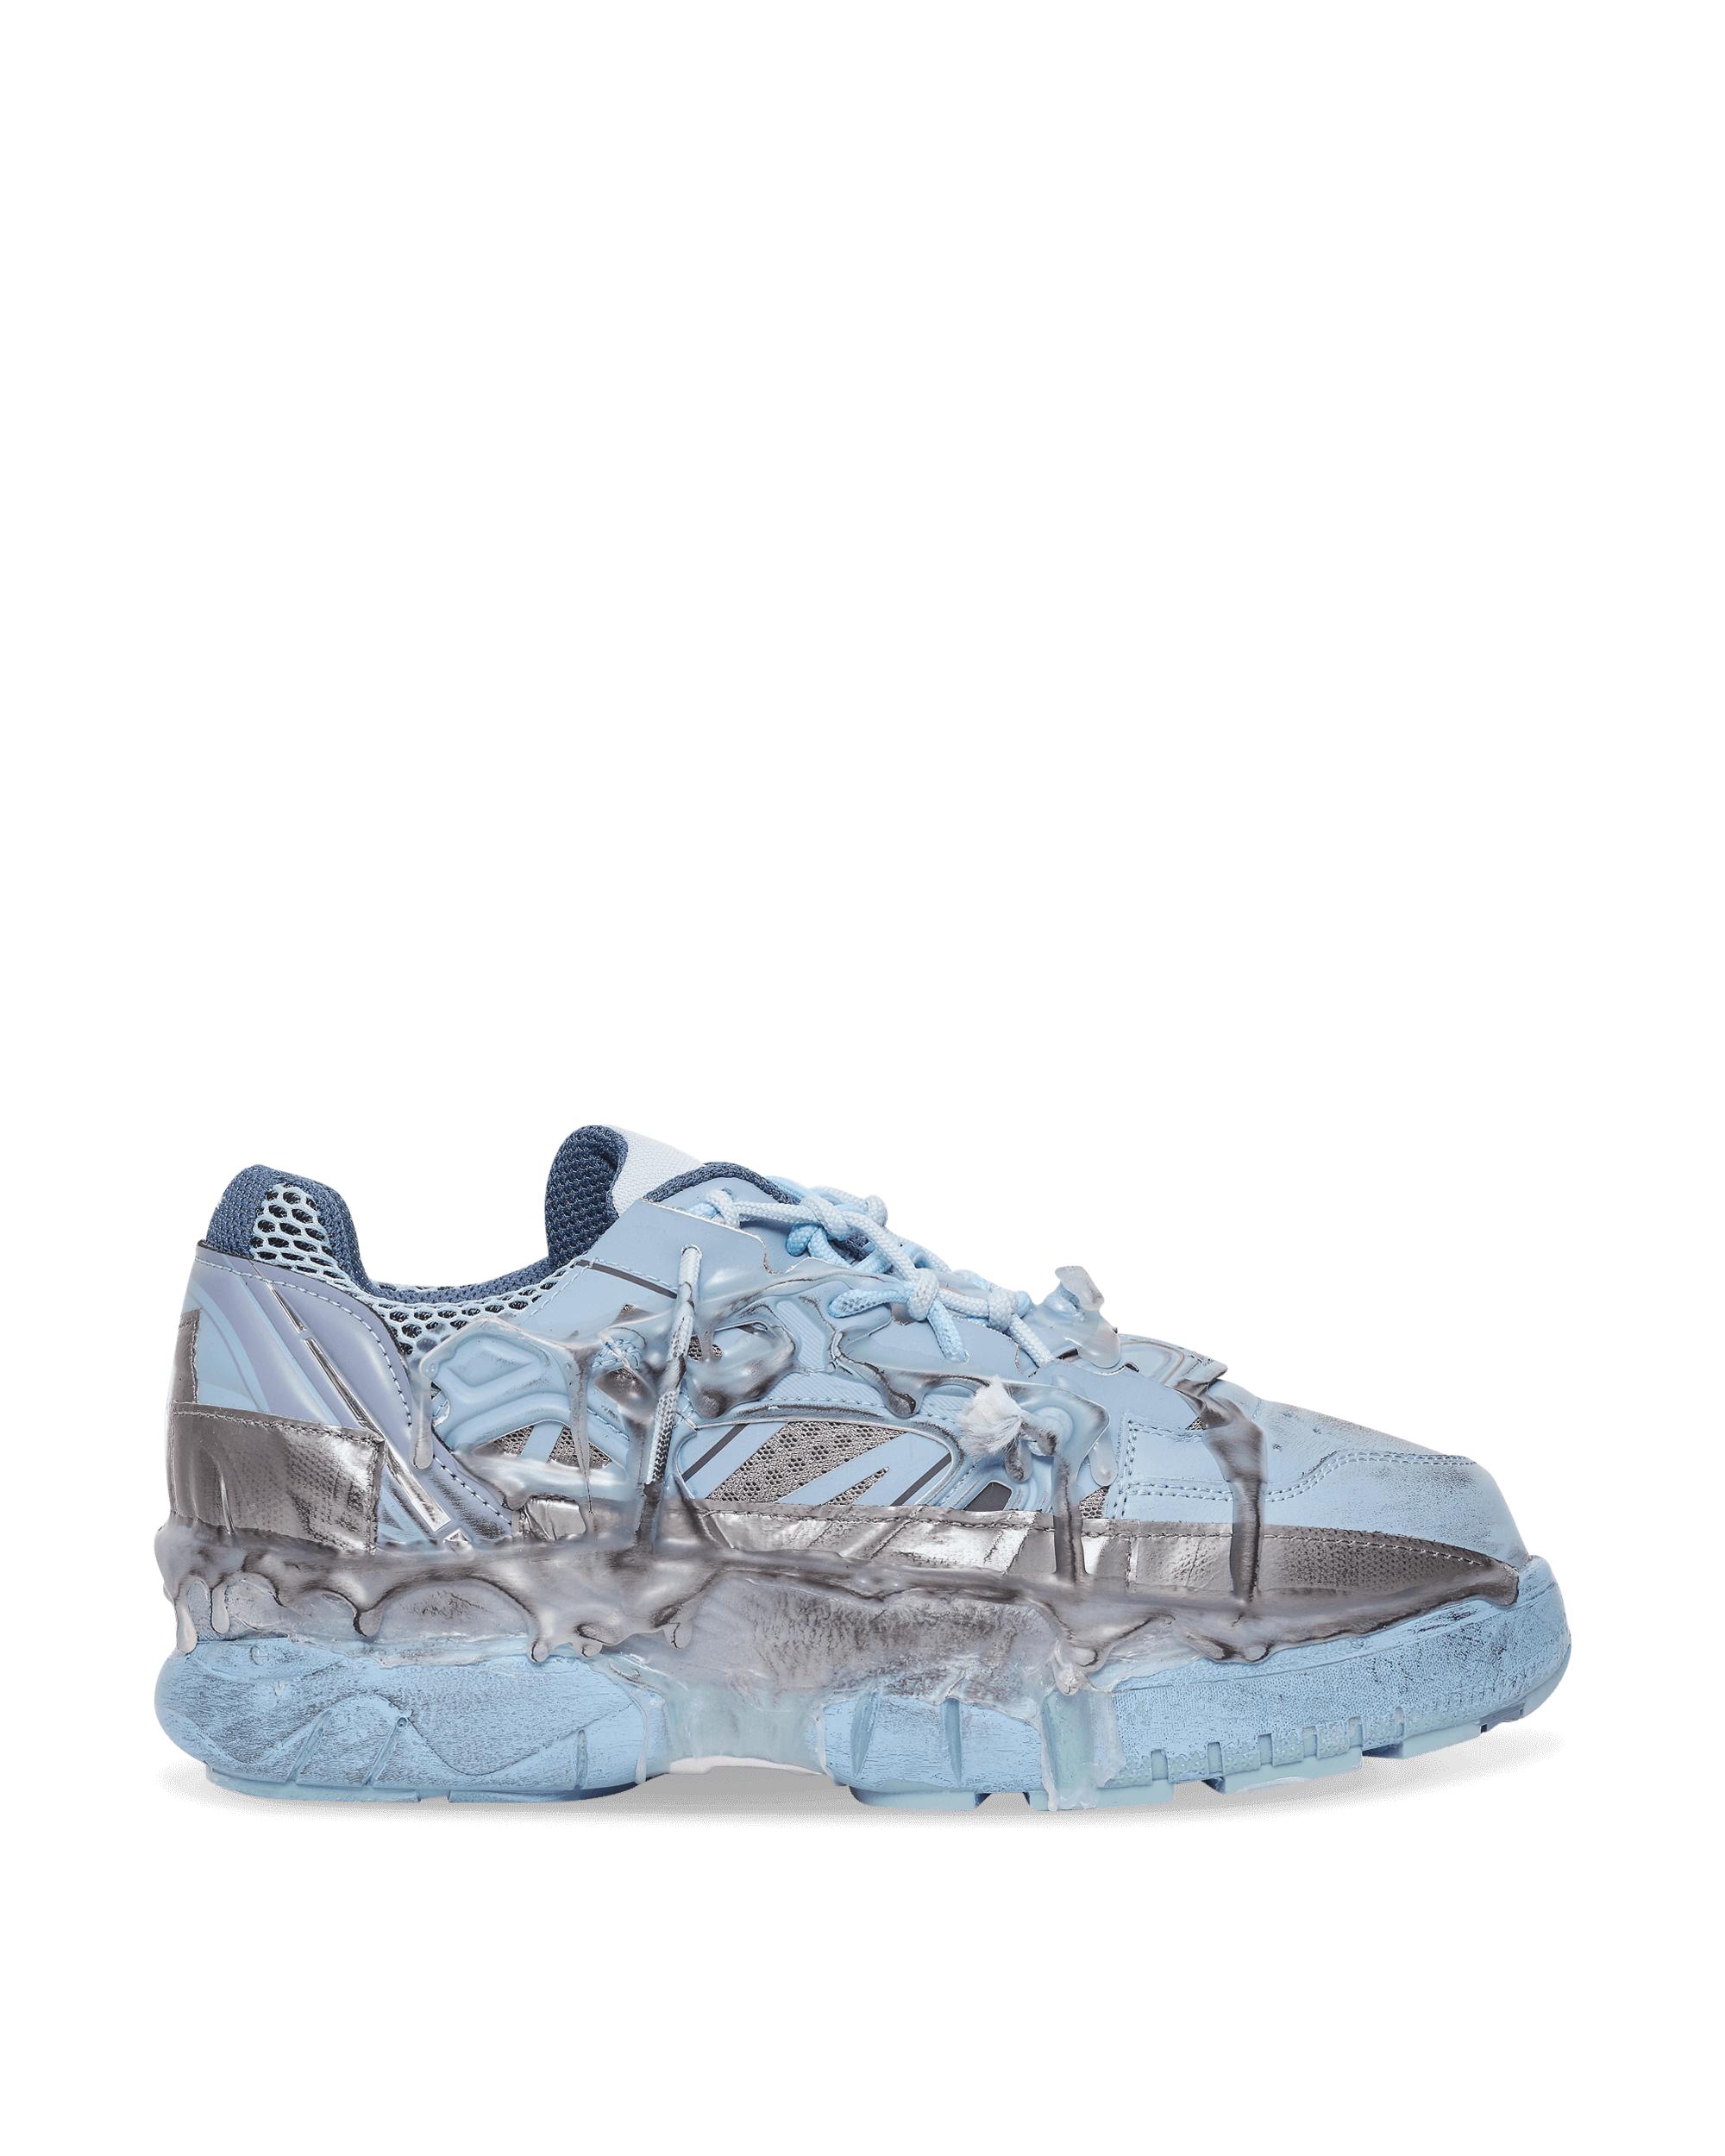 Maison Margiela Leather Fusion Sneakers in Blue for Men | Lyst